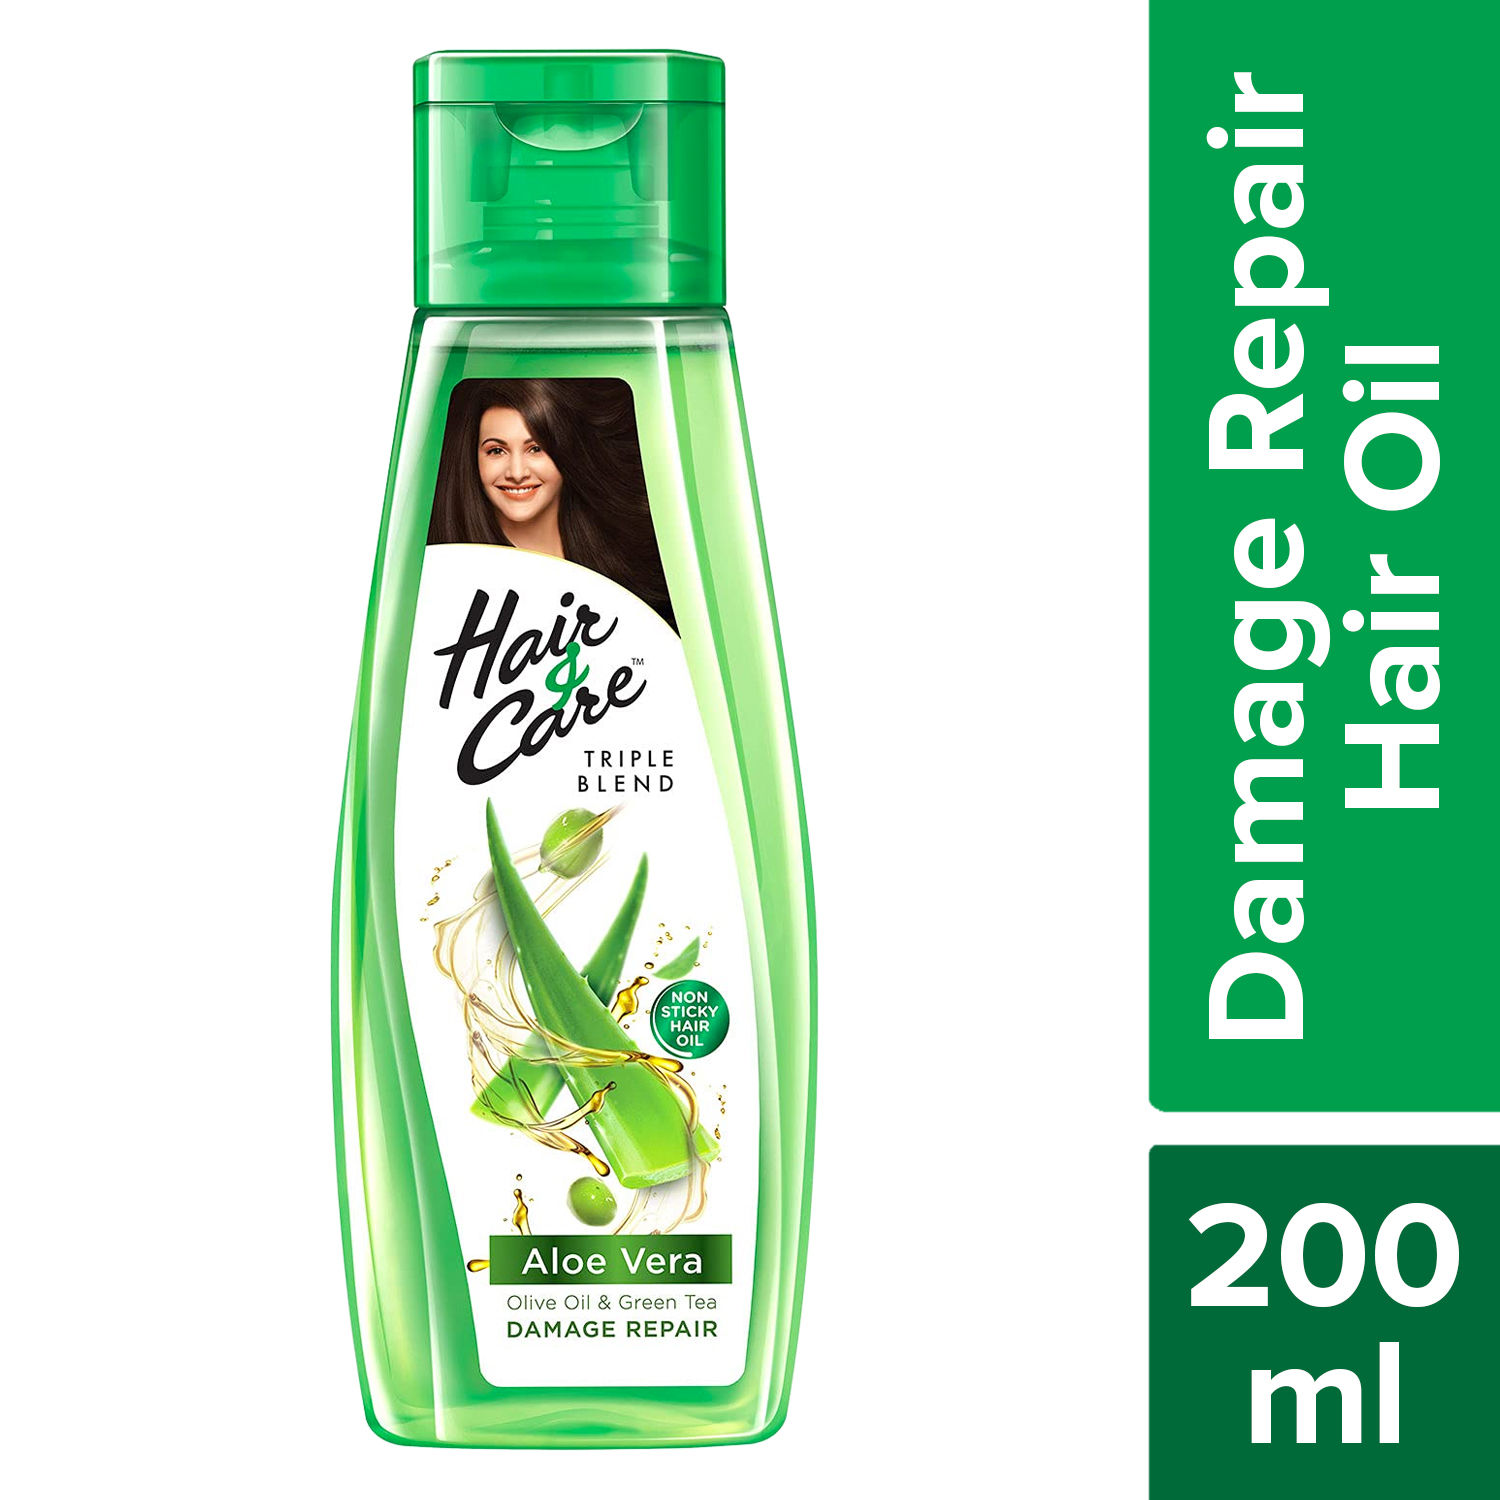 Hair & Care Damage Repair Non-Sticky Hair Oil with Aloe Vera, Olive Oil & Green Tea